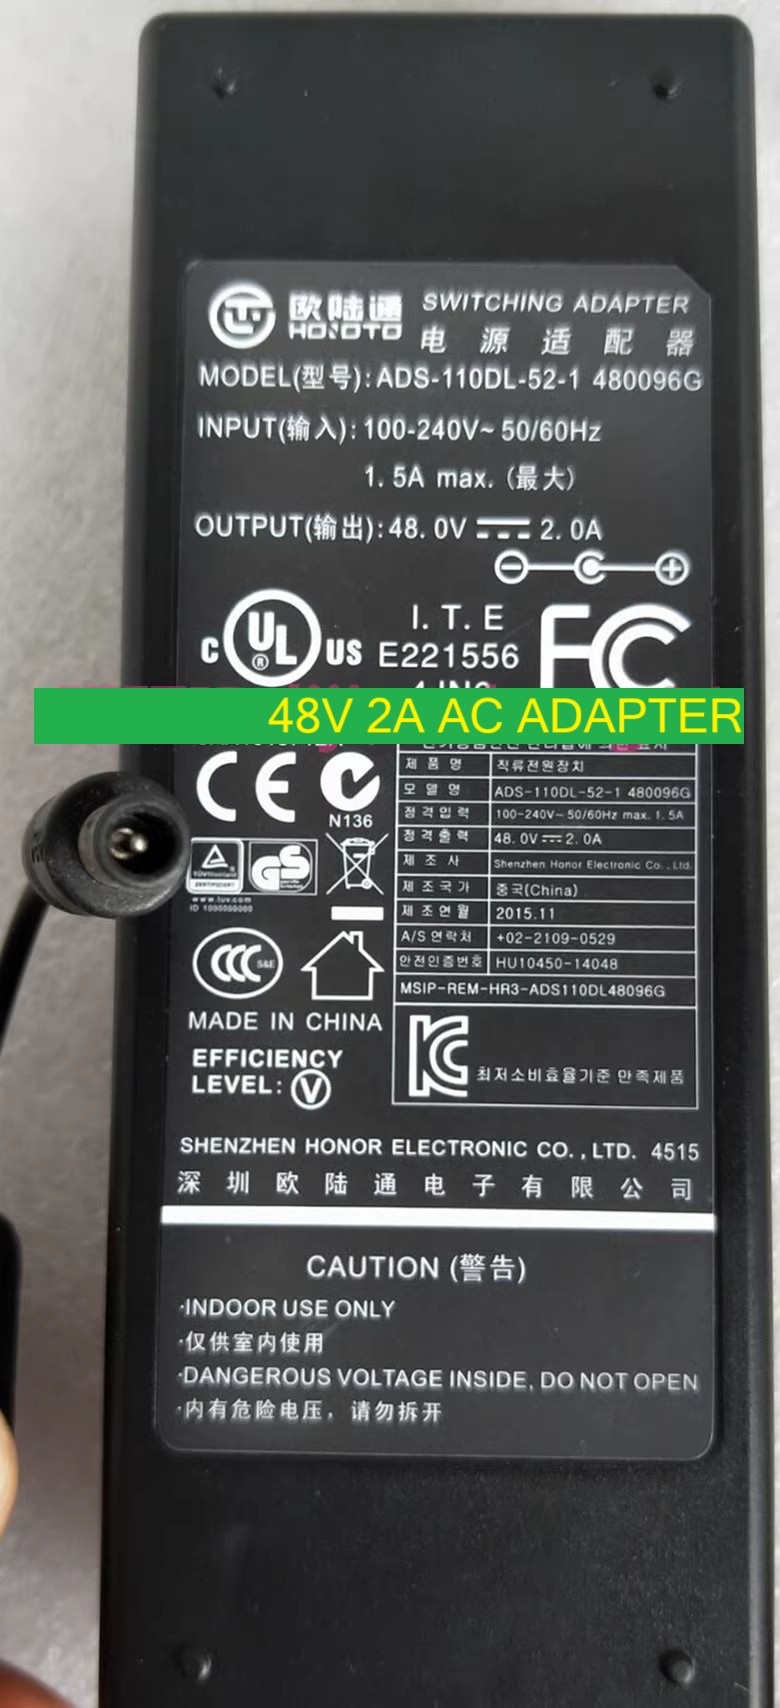 *Brand NEW*HONOR DH-NVR3208-P ADS-110DL-52-1 480096G 48V 2A AC ADAPTER Power Supply